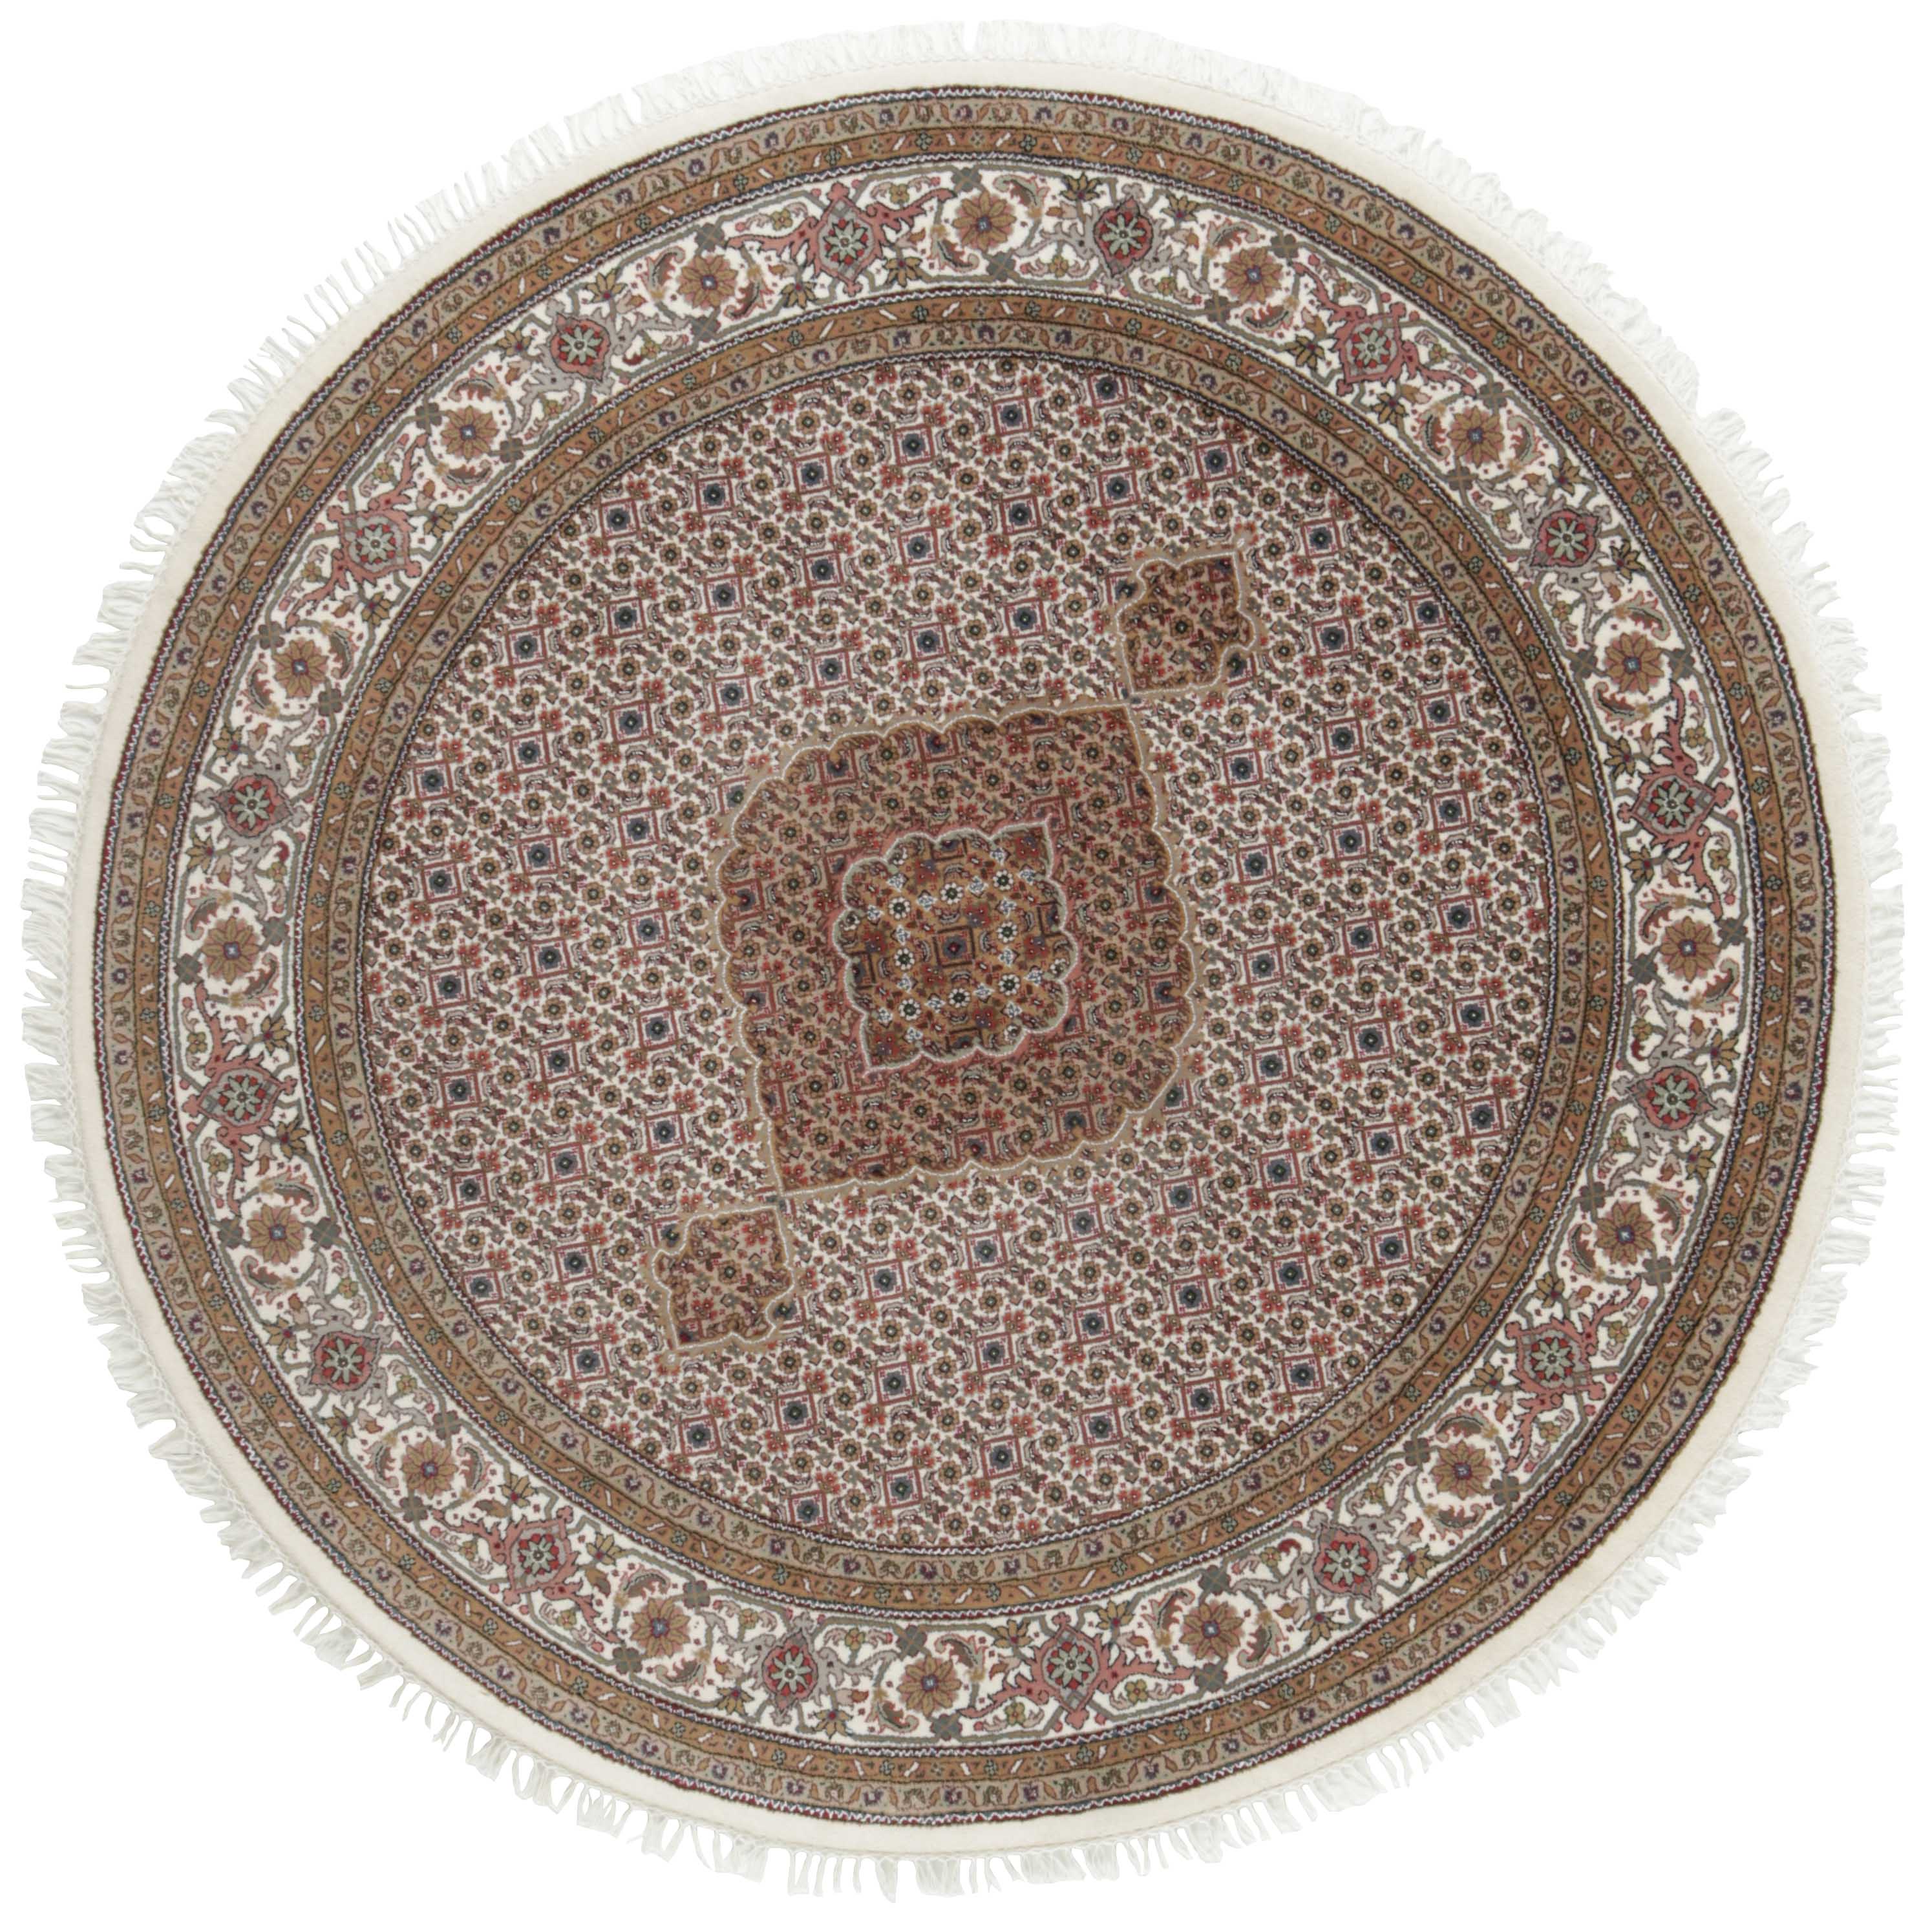 round Oriental rug with traditional geometric and floral design in black and beige